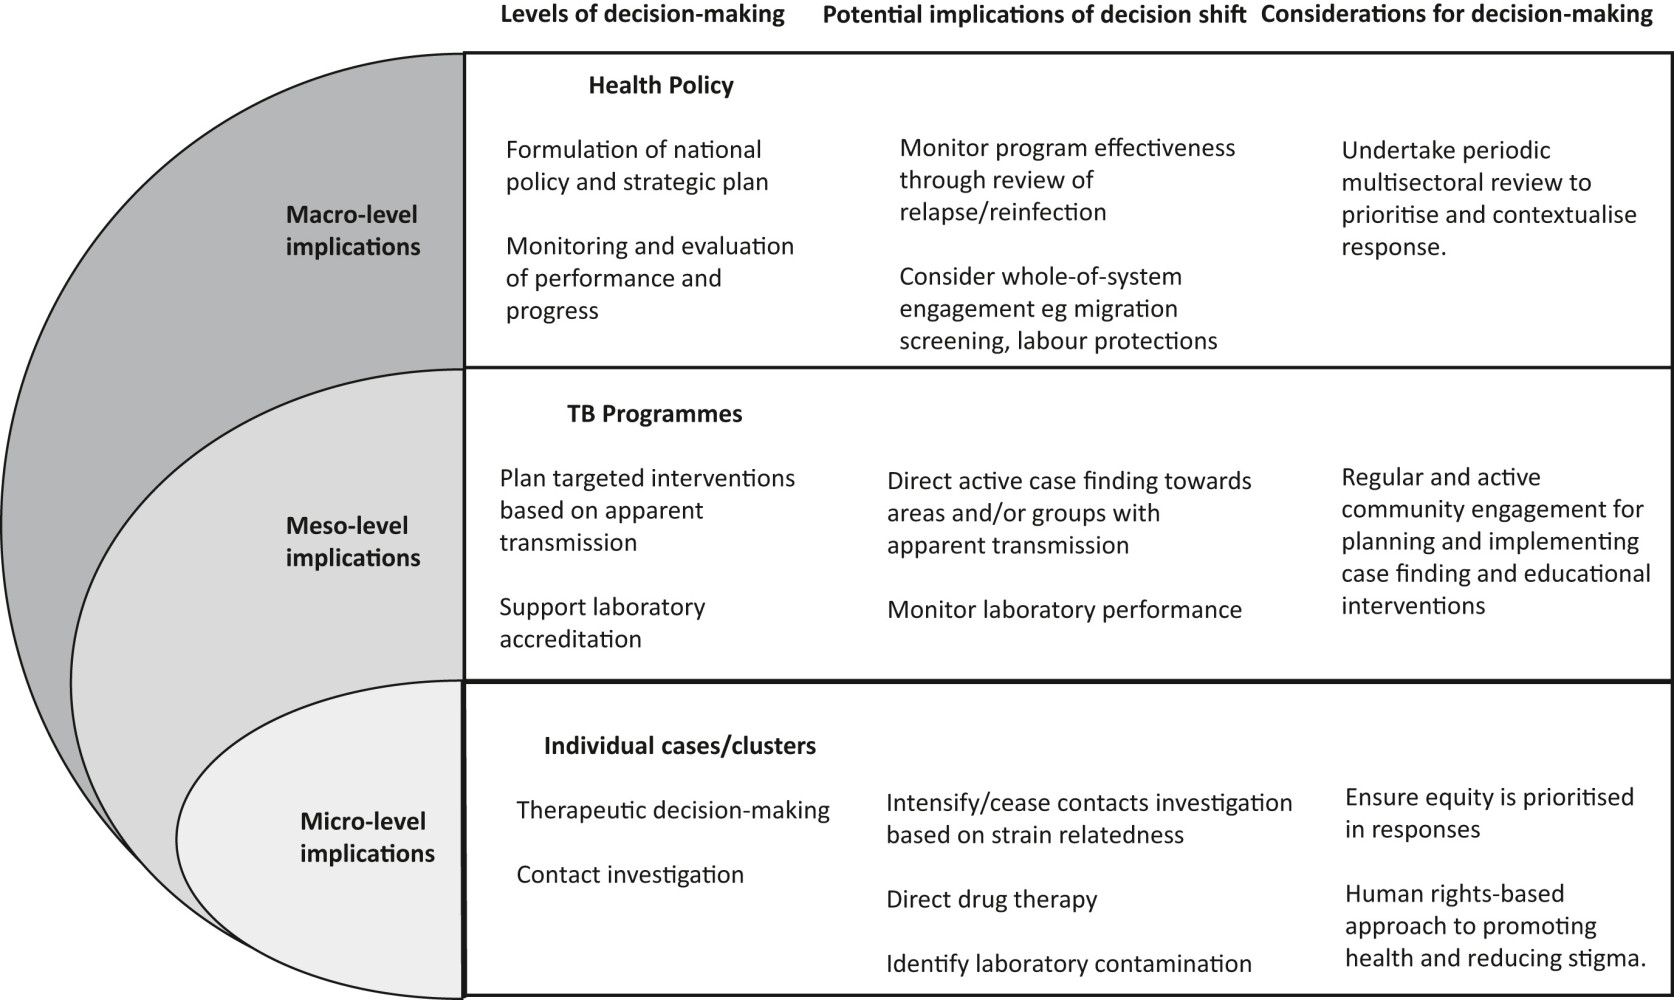 Fig. 1. Levels of decision-making and examples of public health application of M tuberculosis whole genome sequencing. Adapted from Sawatzky R, Kwon JY, Barclay R et al. Implications of response shift for micro-, meso-, and macro-level healthcare decision-making using results of patient-reported outcome measures. Quality of Life Research. 2021; 30:3343–3357.